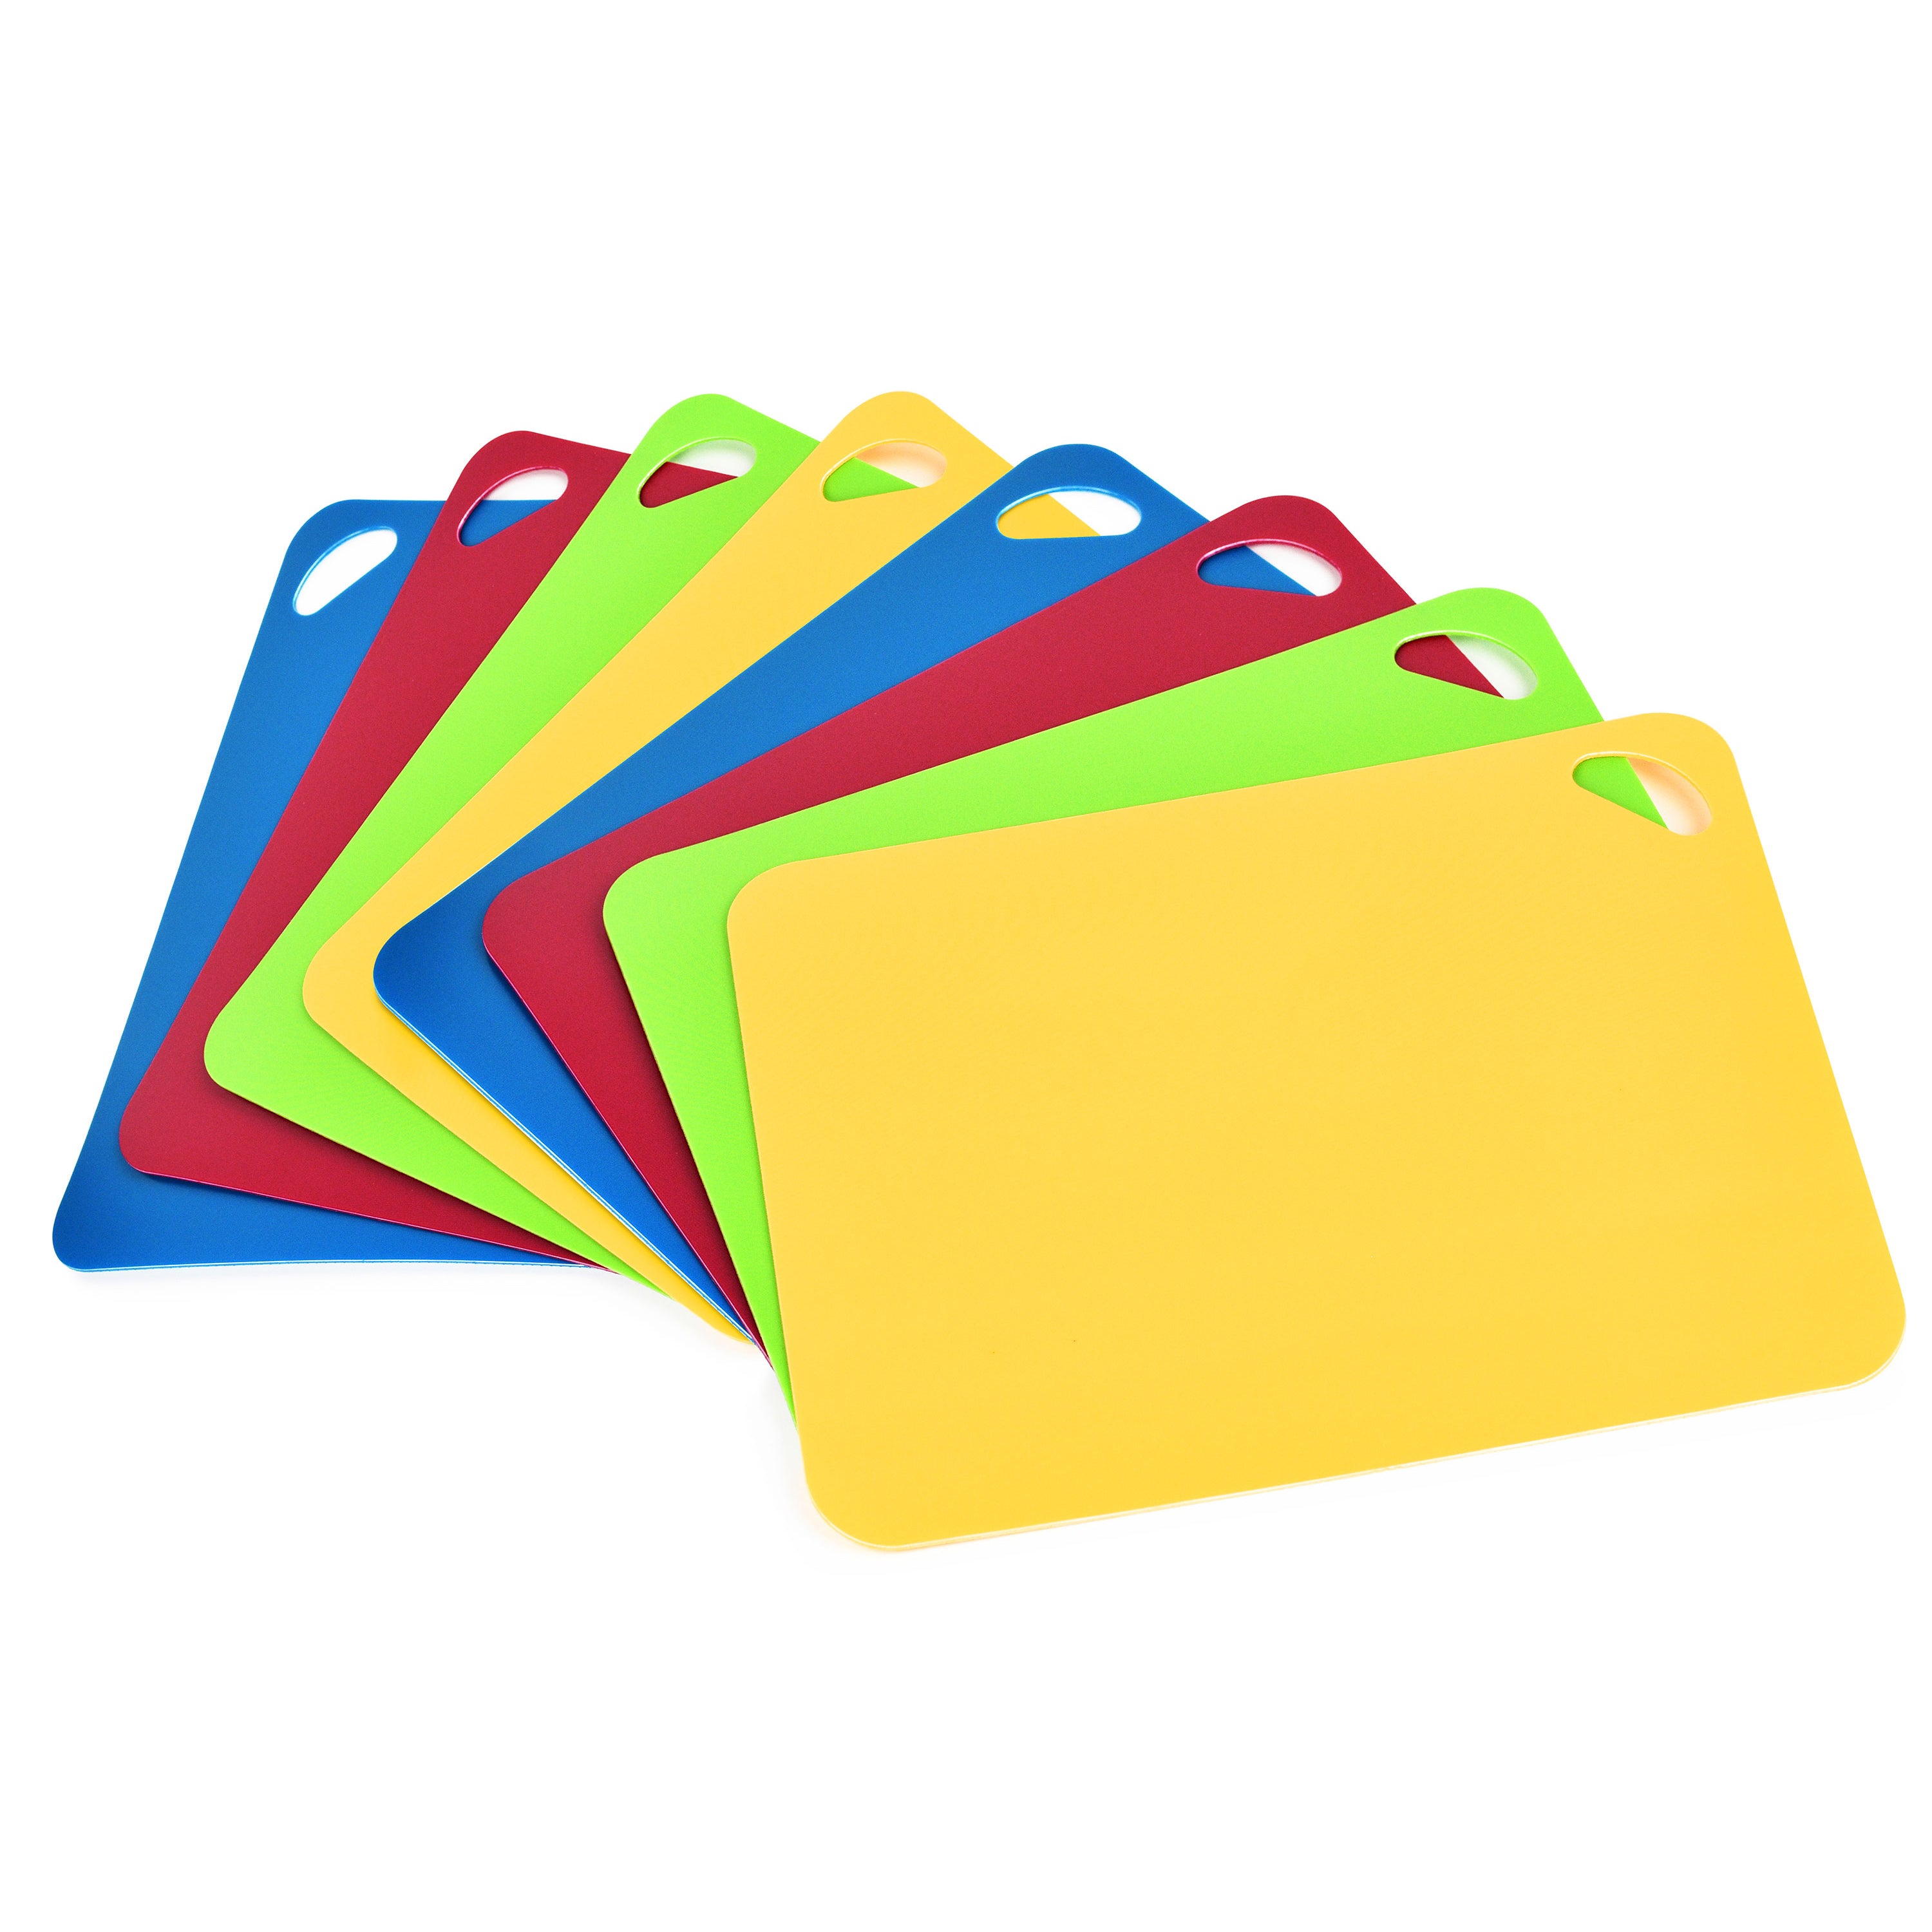 Extra Thick Flexible Cutting Boards for Kitchen - Cutting Mats for Cooking,  Colored Cutting Mat Set with Easy-Grip Handles